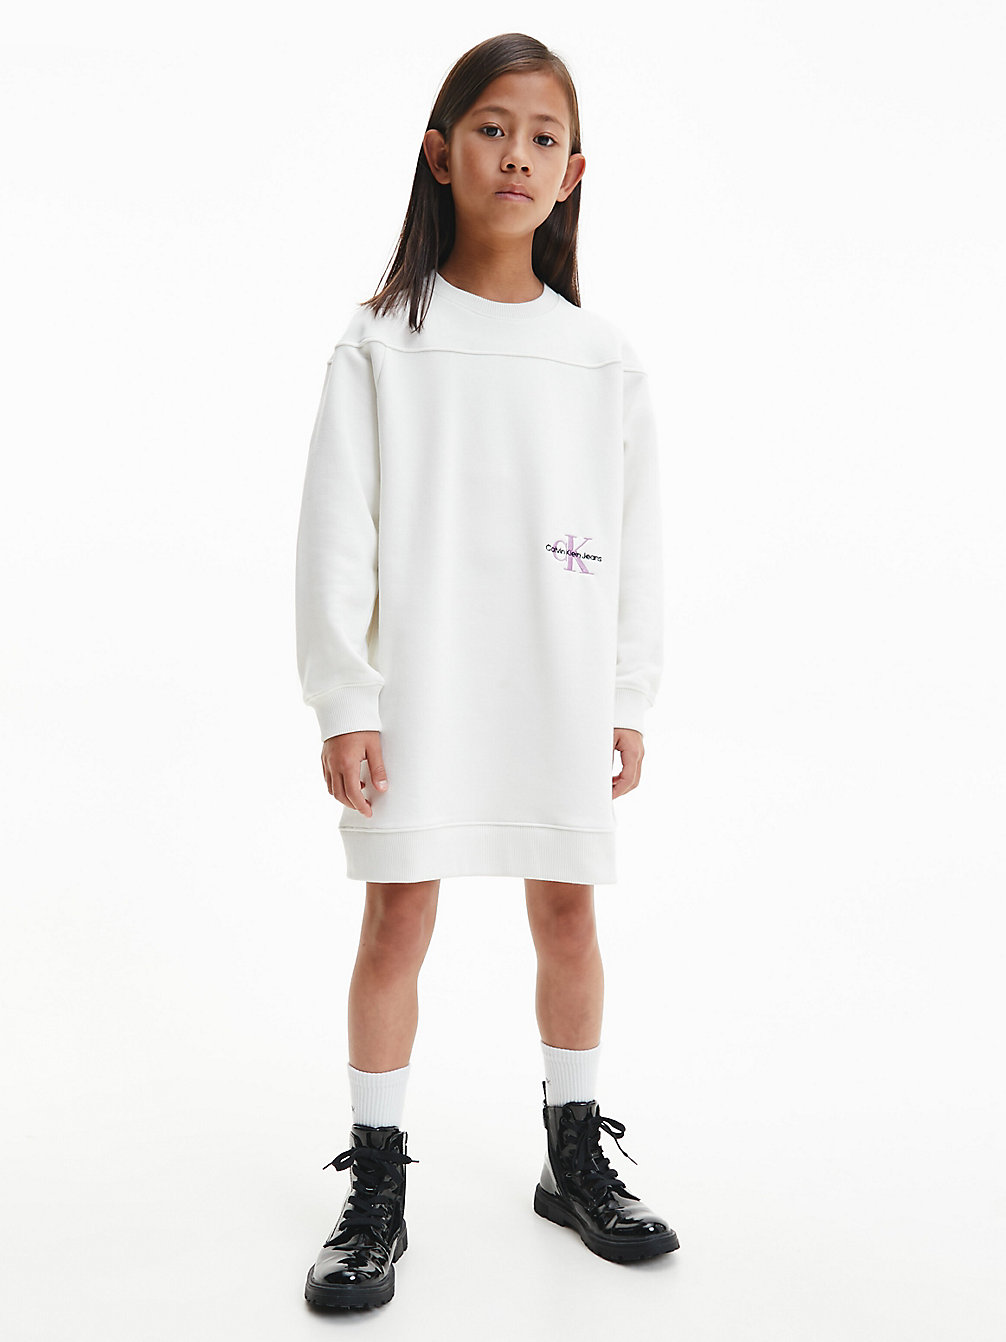 Robe Sweat Relaxed > IVORY > undefined girls > Calvin Klein